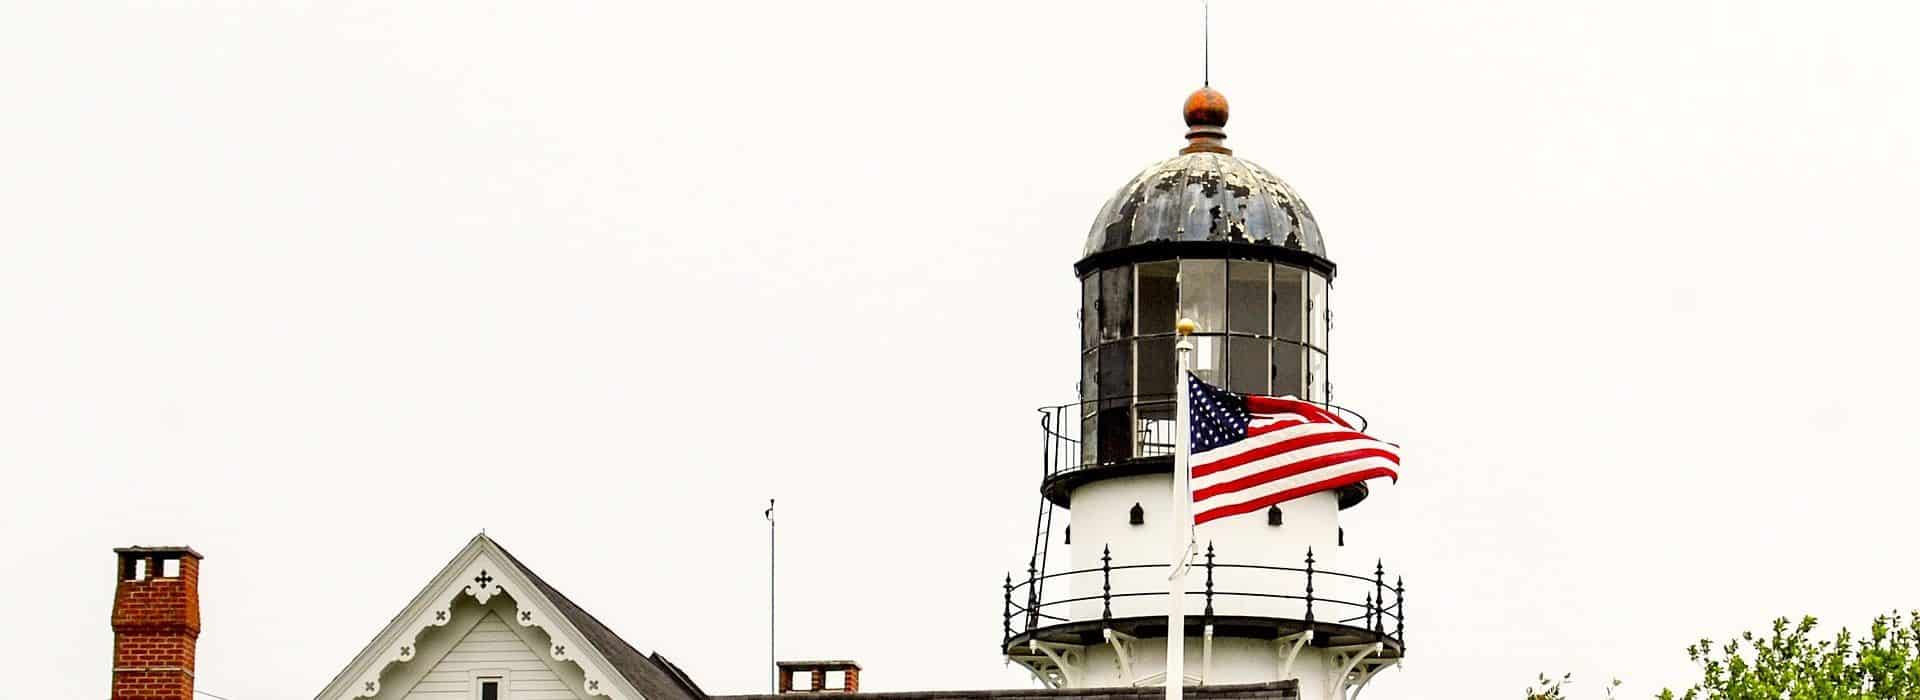 Top section of old lighthouse painted white with black steal